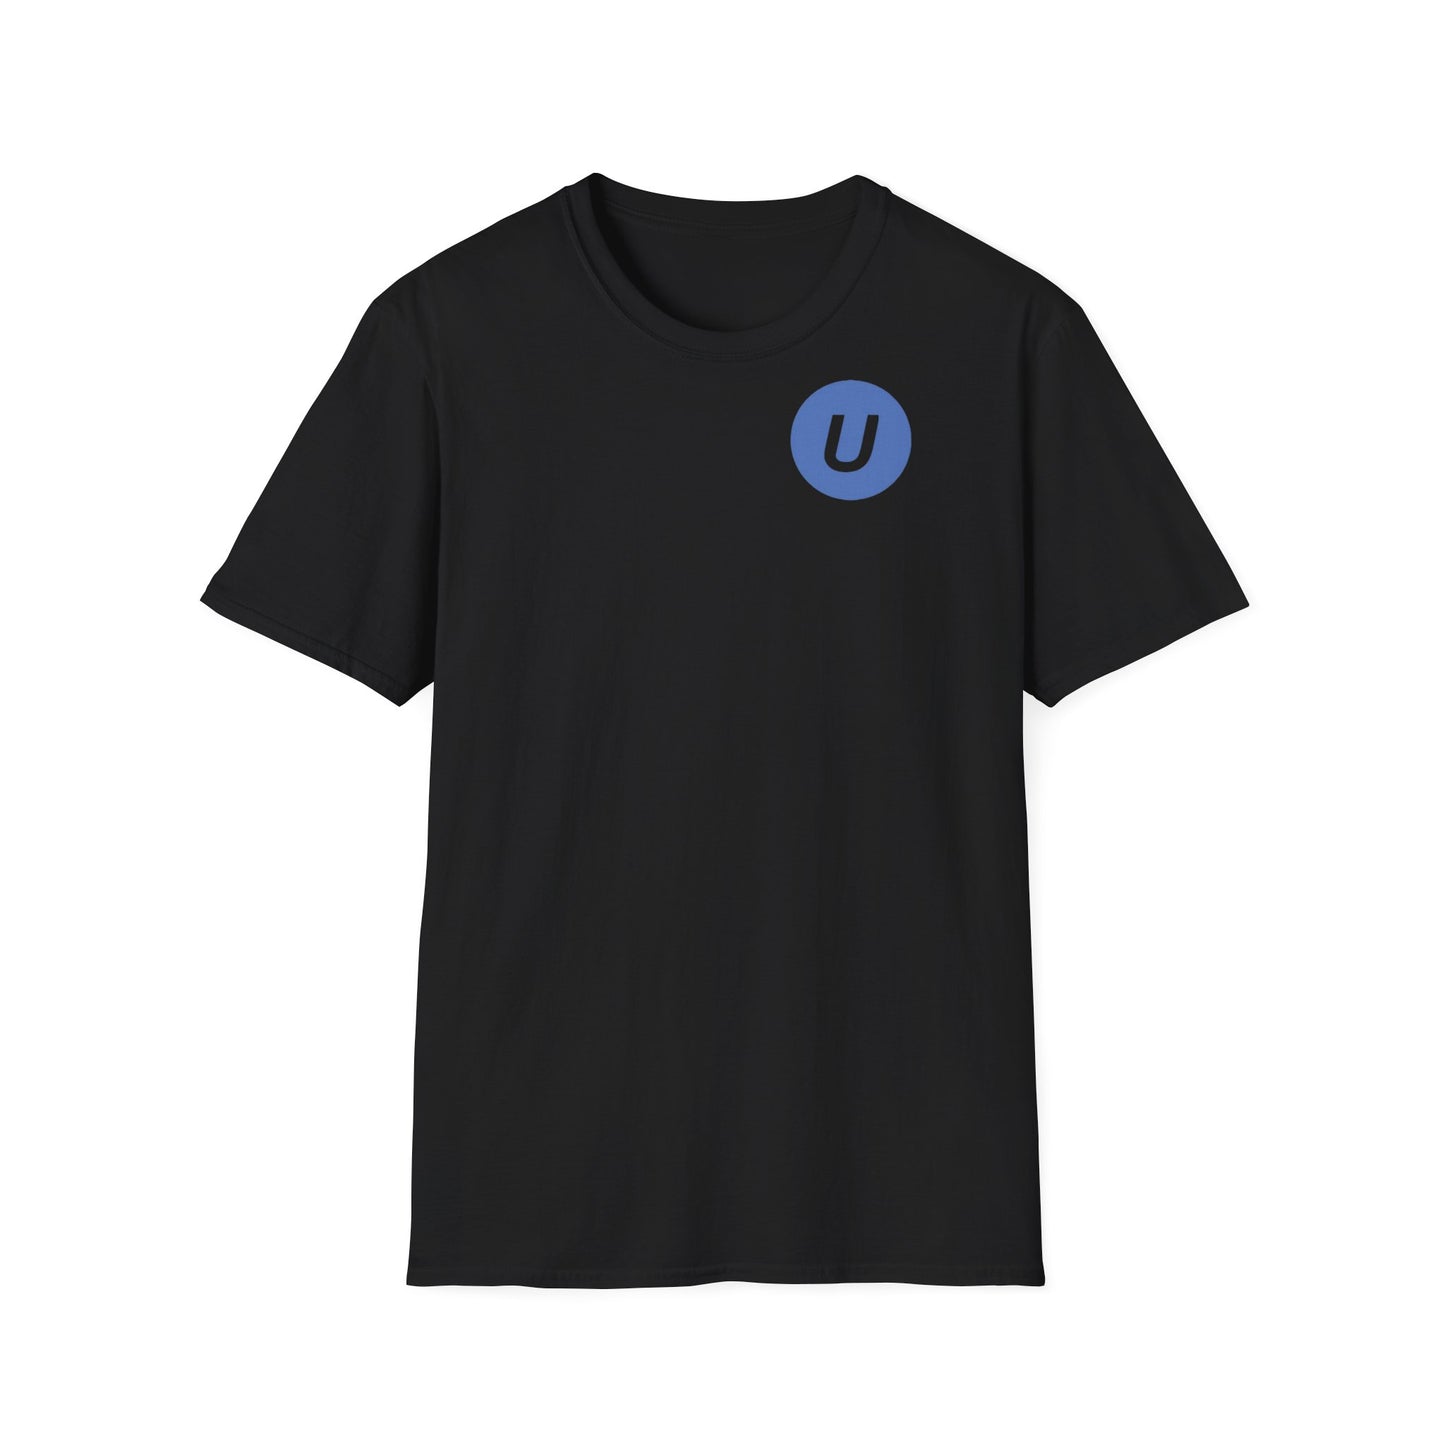 Clothing - UnrealIRCd "Ask me about my IRC server" Unisex Softstyle T-Shirt